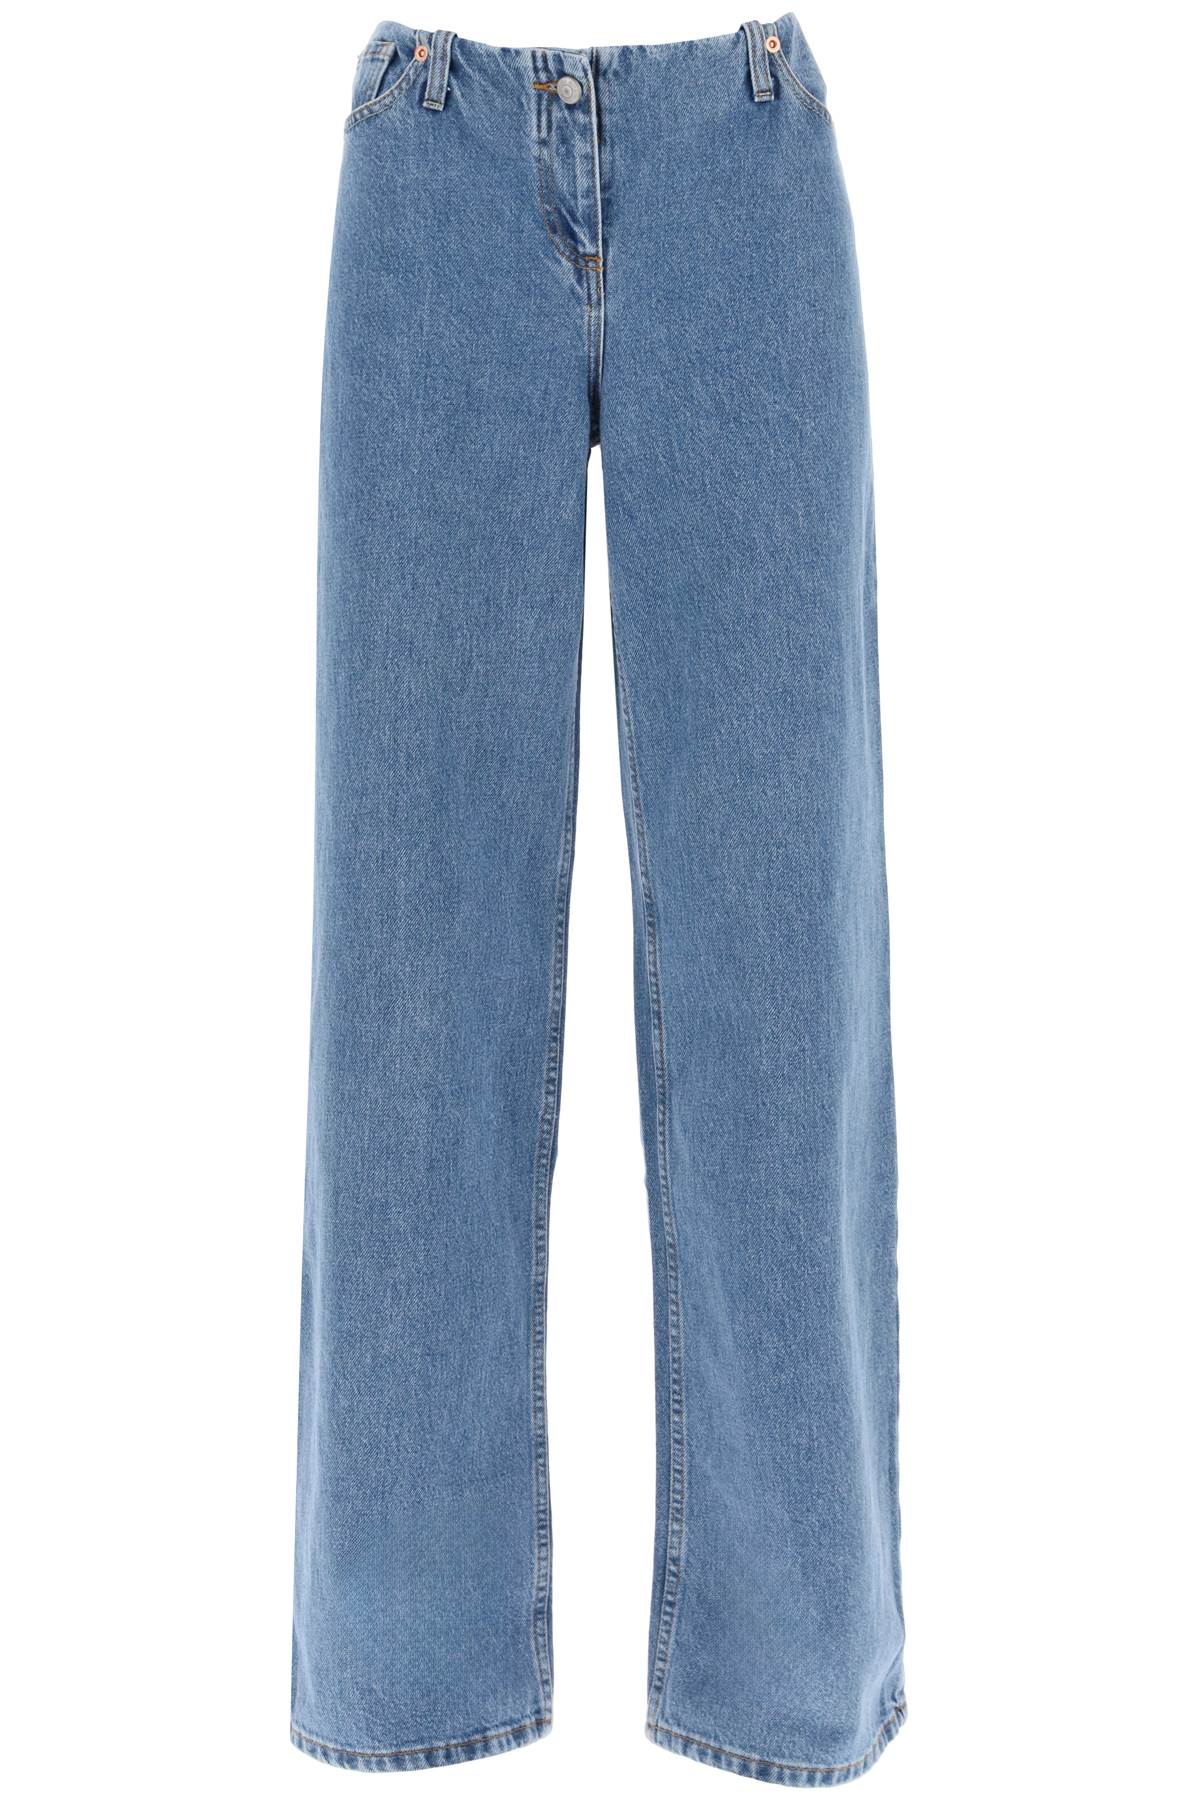 MAGDA BUTRYM Blue Baggy Low Waist Jeans for Women - Wide-Leg Silhouette and Banded Waist